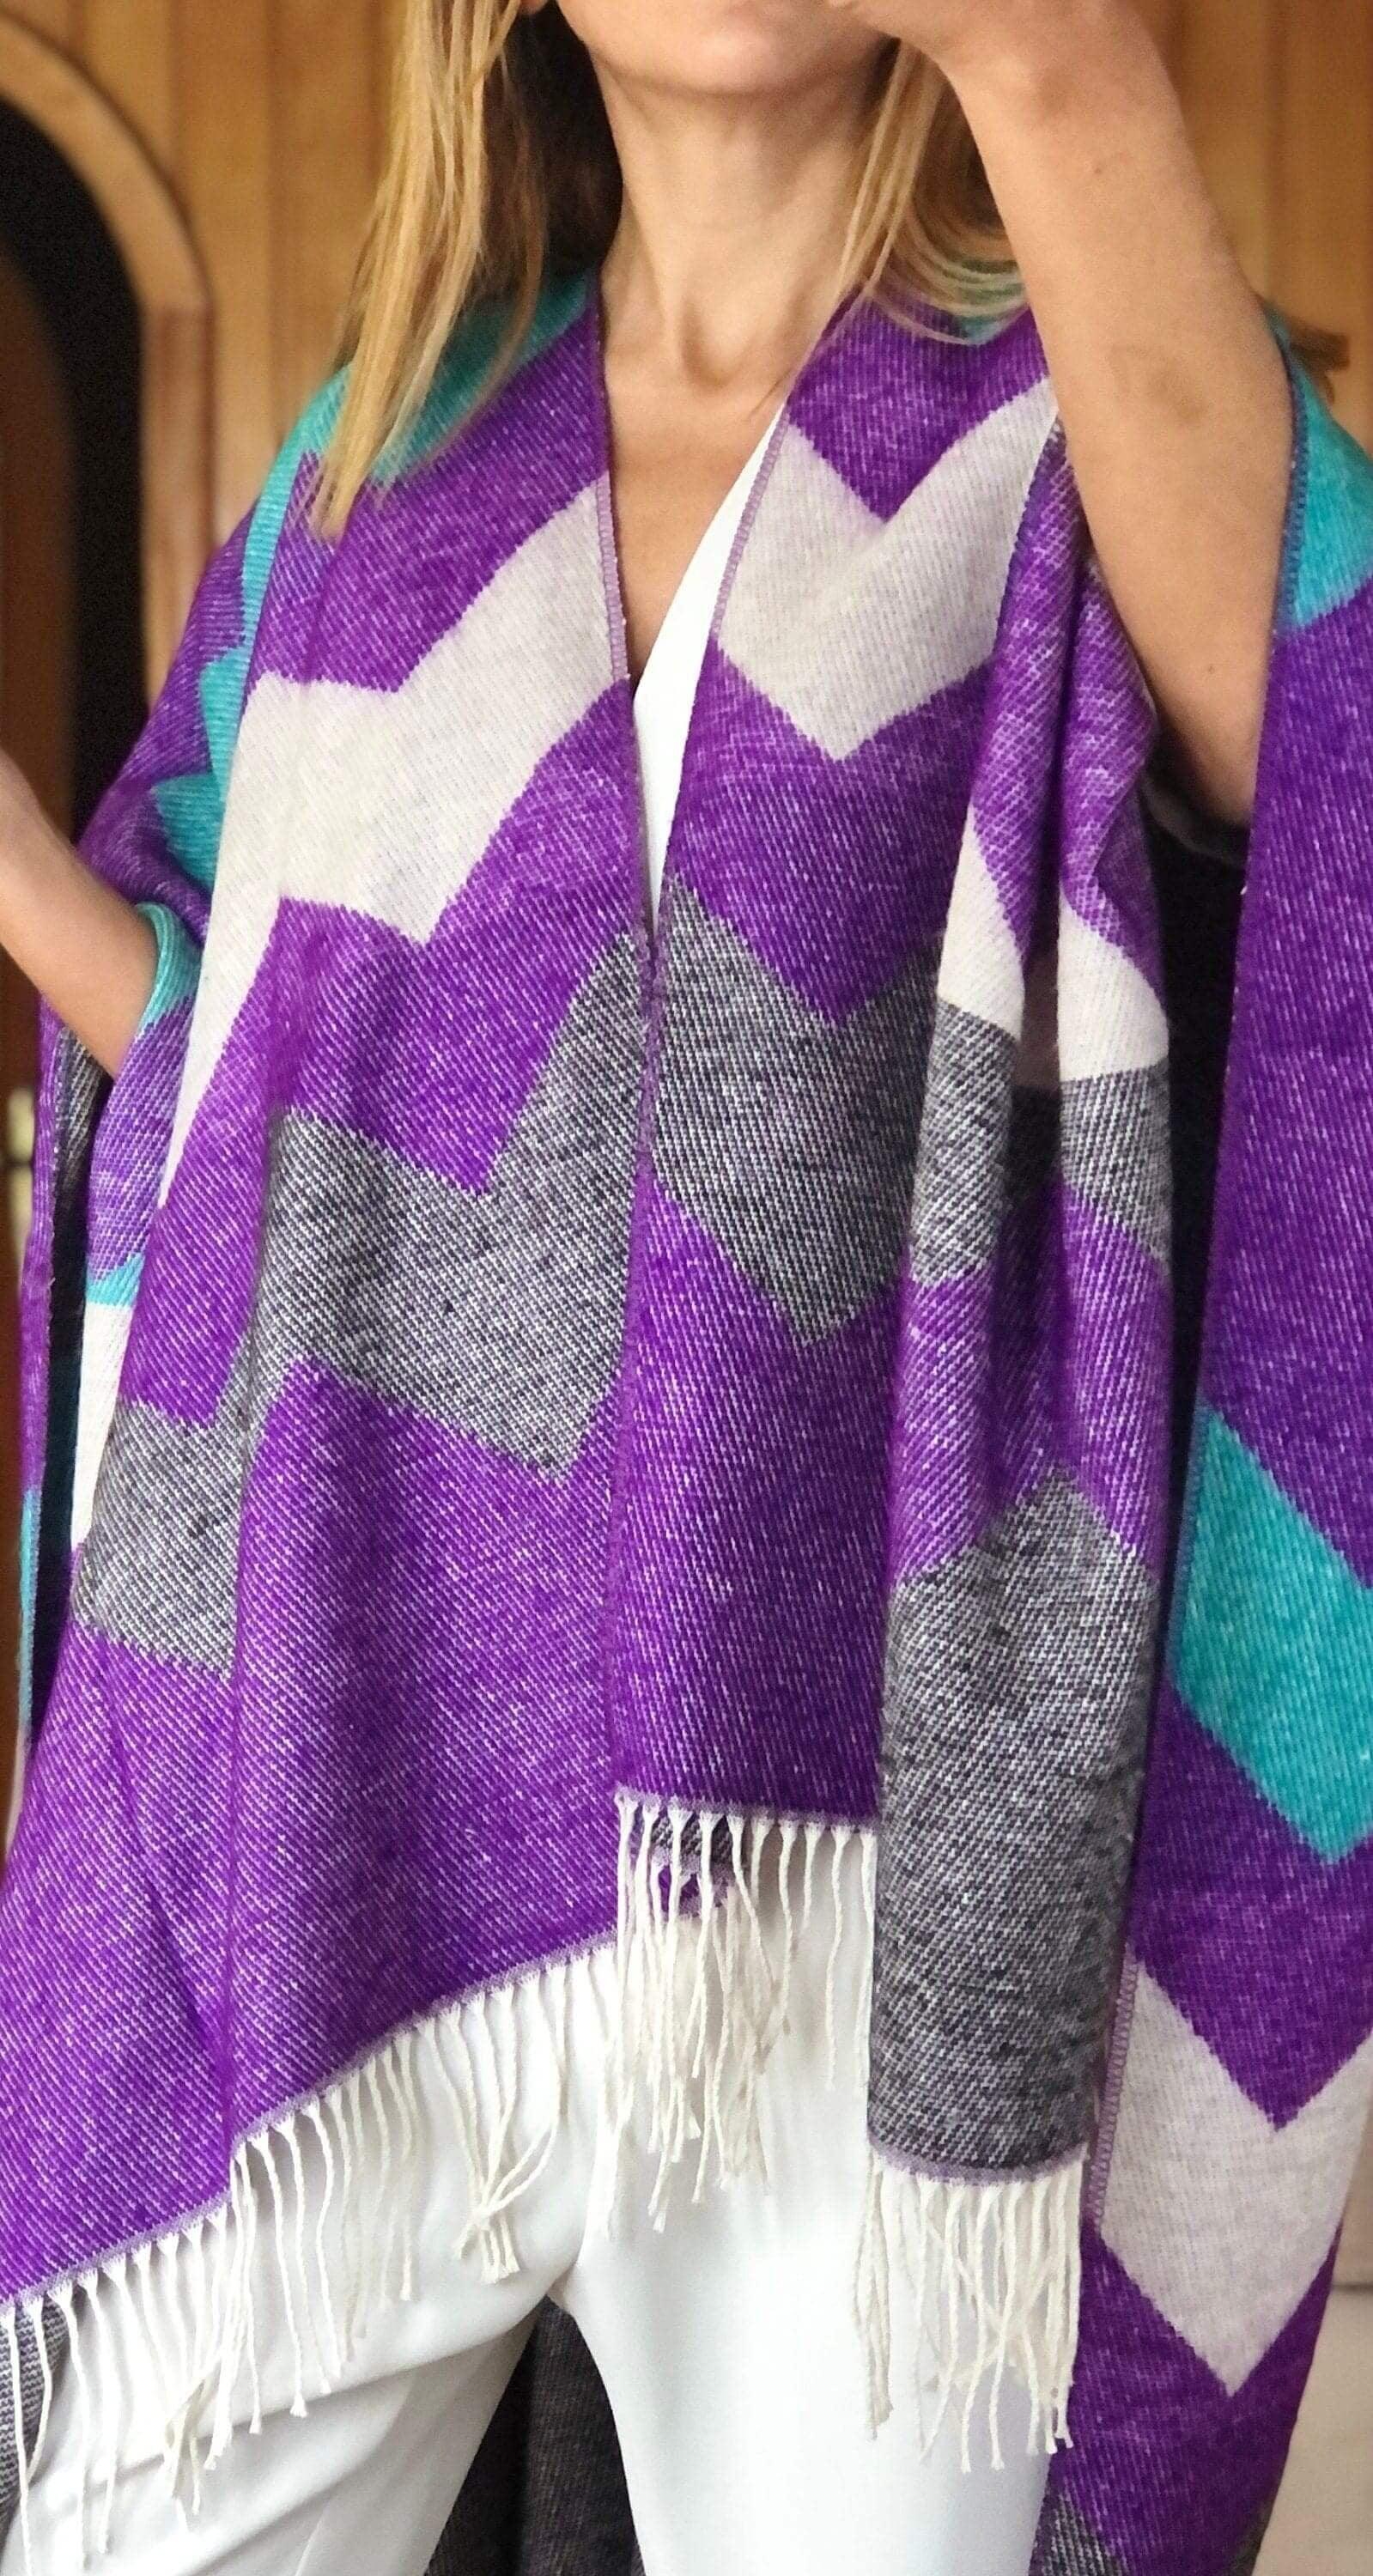 Handcrafted Geometric Wool and Acrylic Poncho in Purple, Gray, White, Blue - Perfect for Fall and Winter, Large and Warm, Ideal Gift for Mom available at Moyoni Design